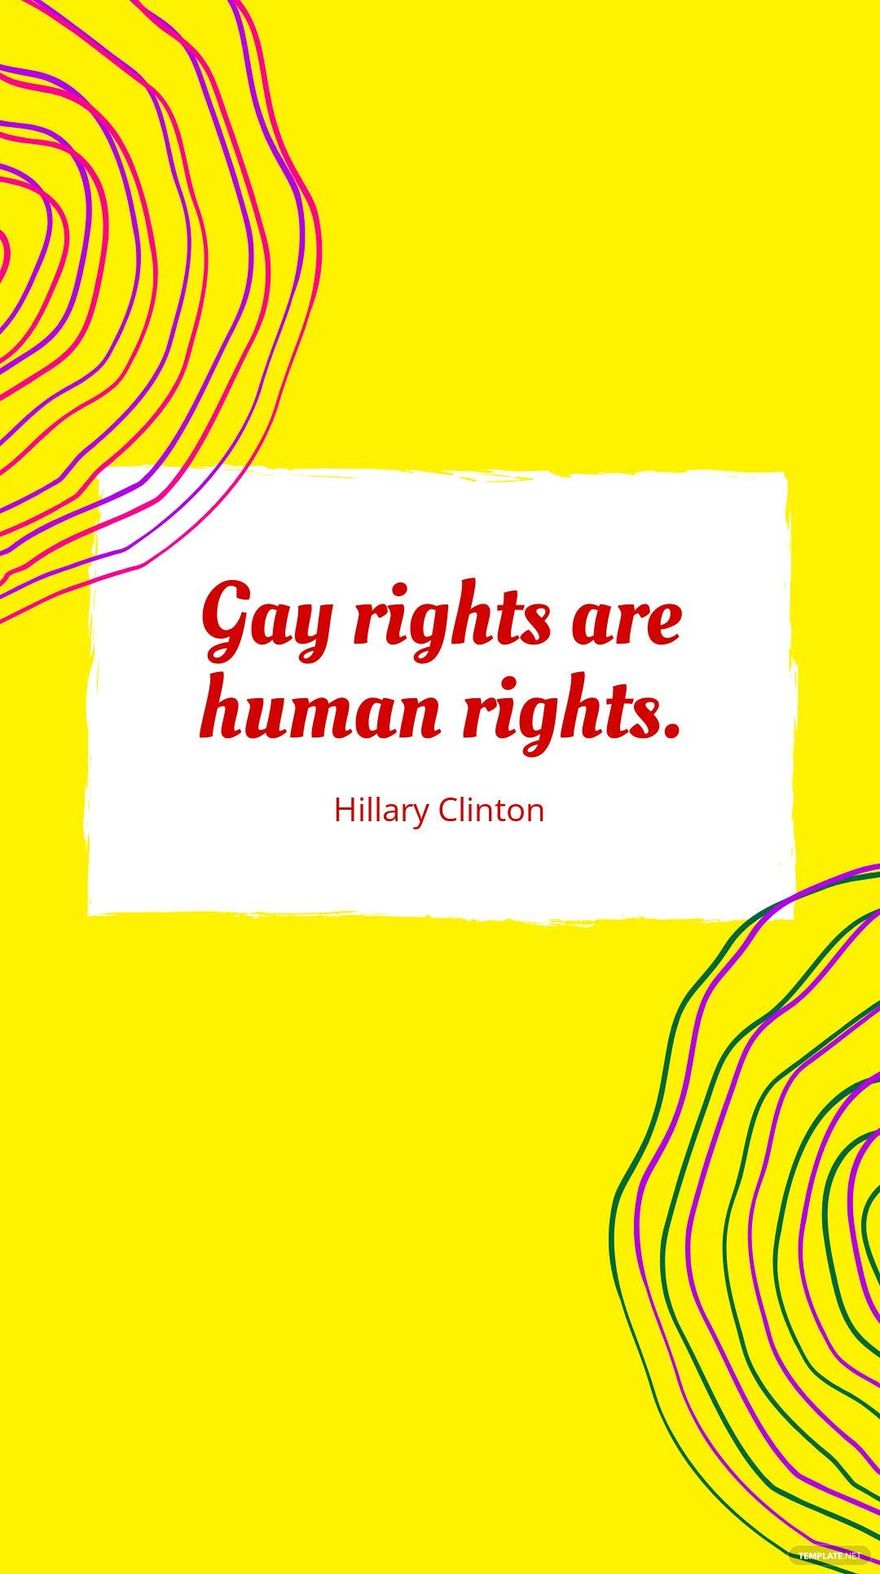 Free Hillary Clinton - Gay rights are human rights.